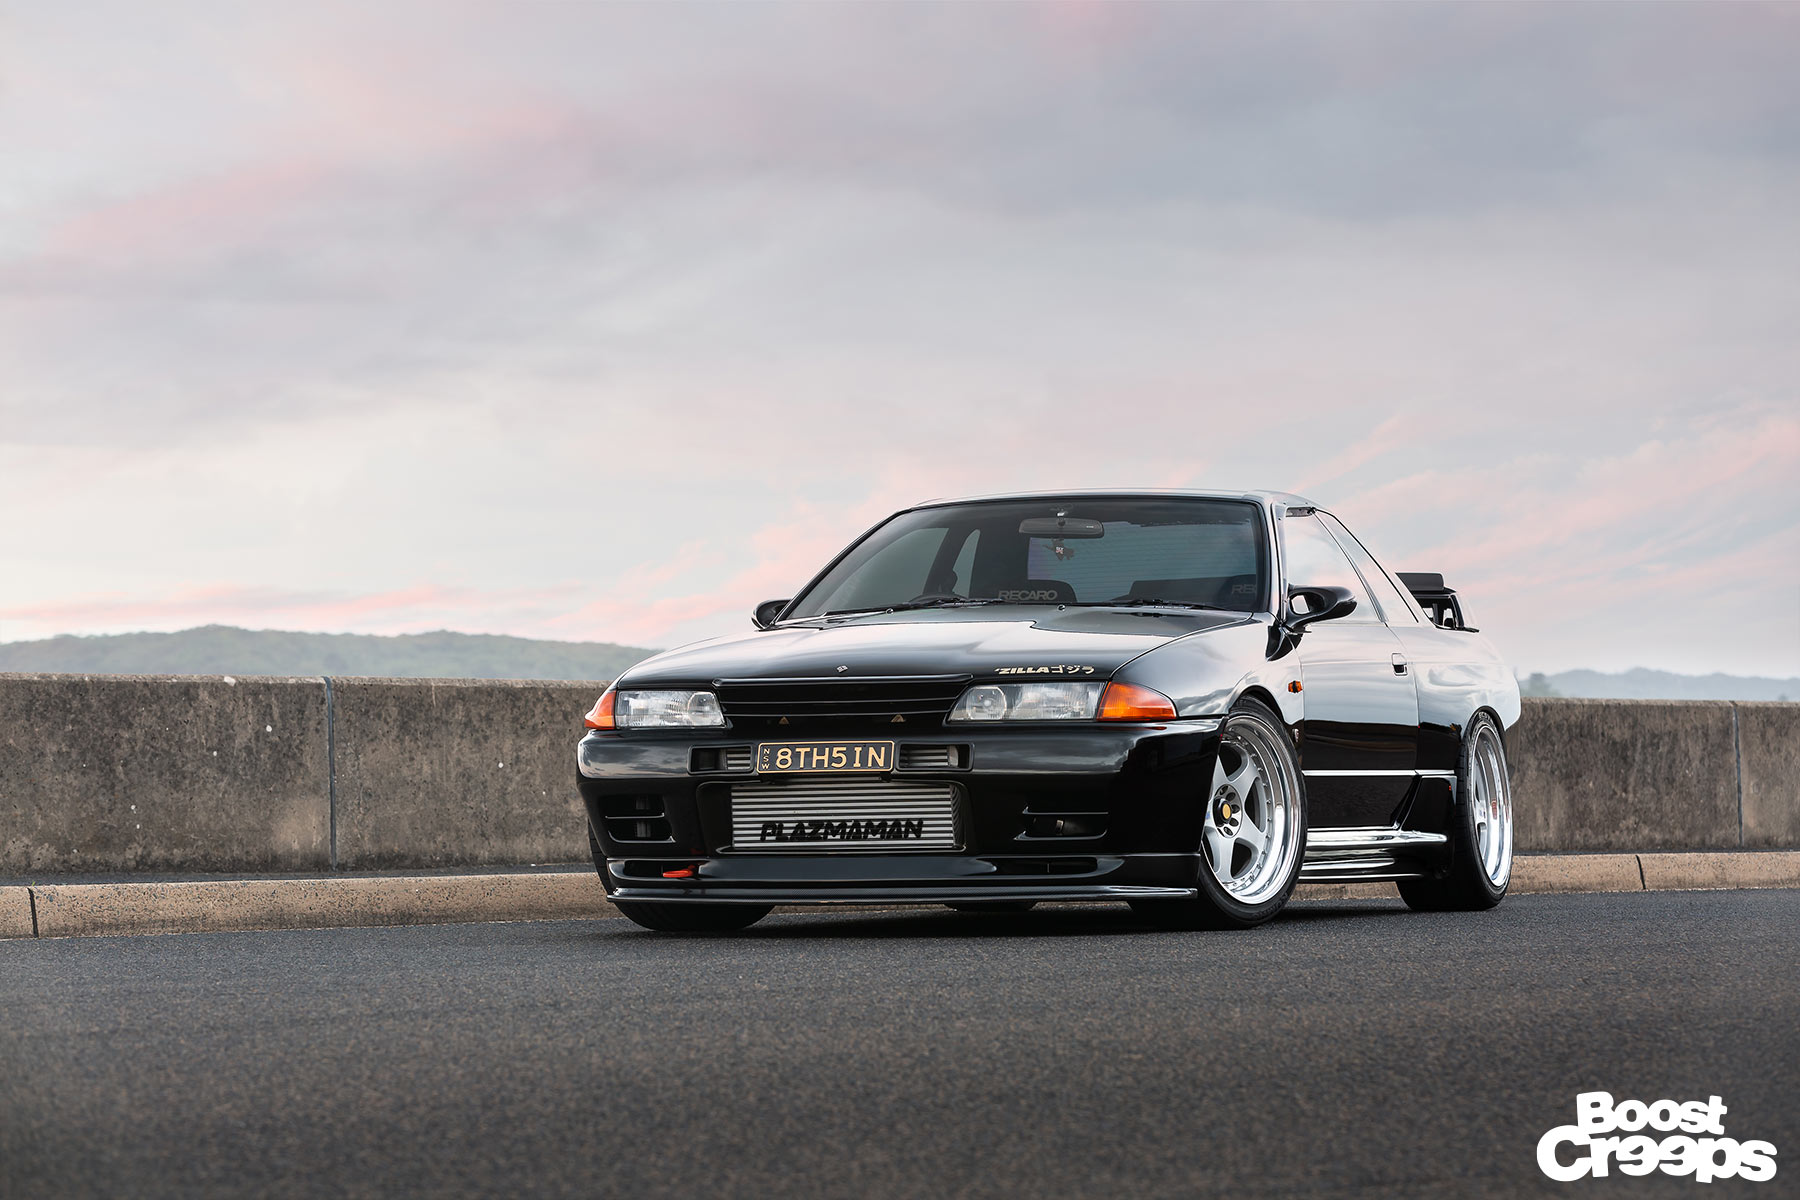 Kase’s LMGT2 Equipped R32 GTR Is Seriously Impressive